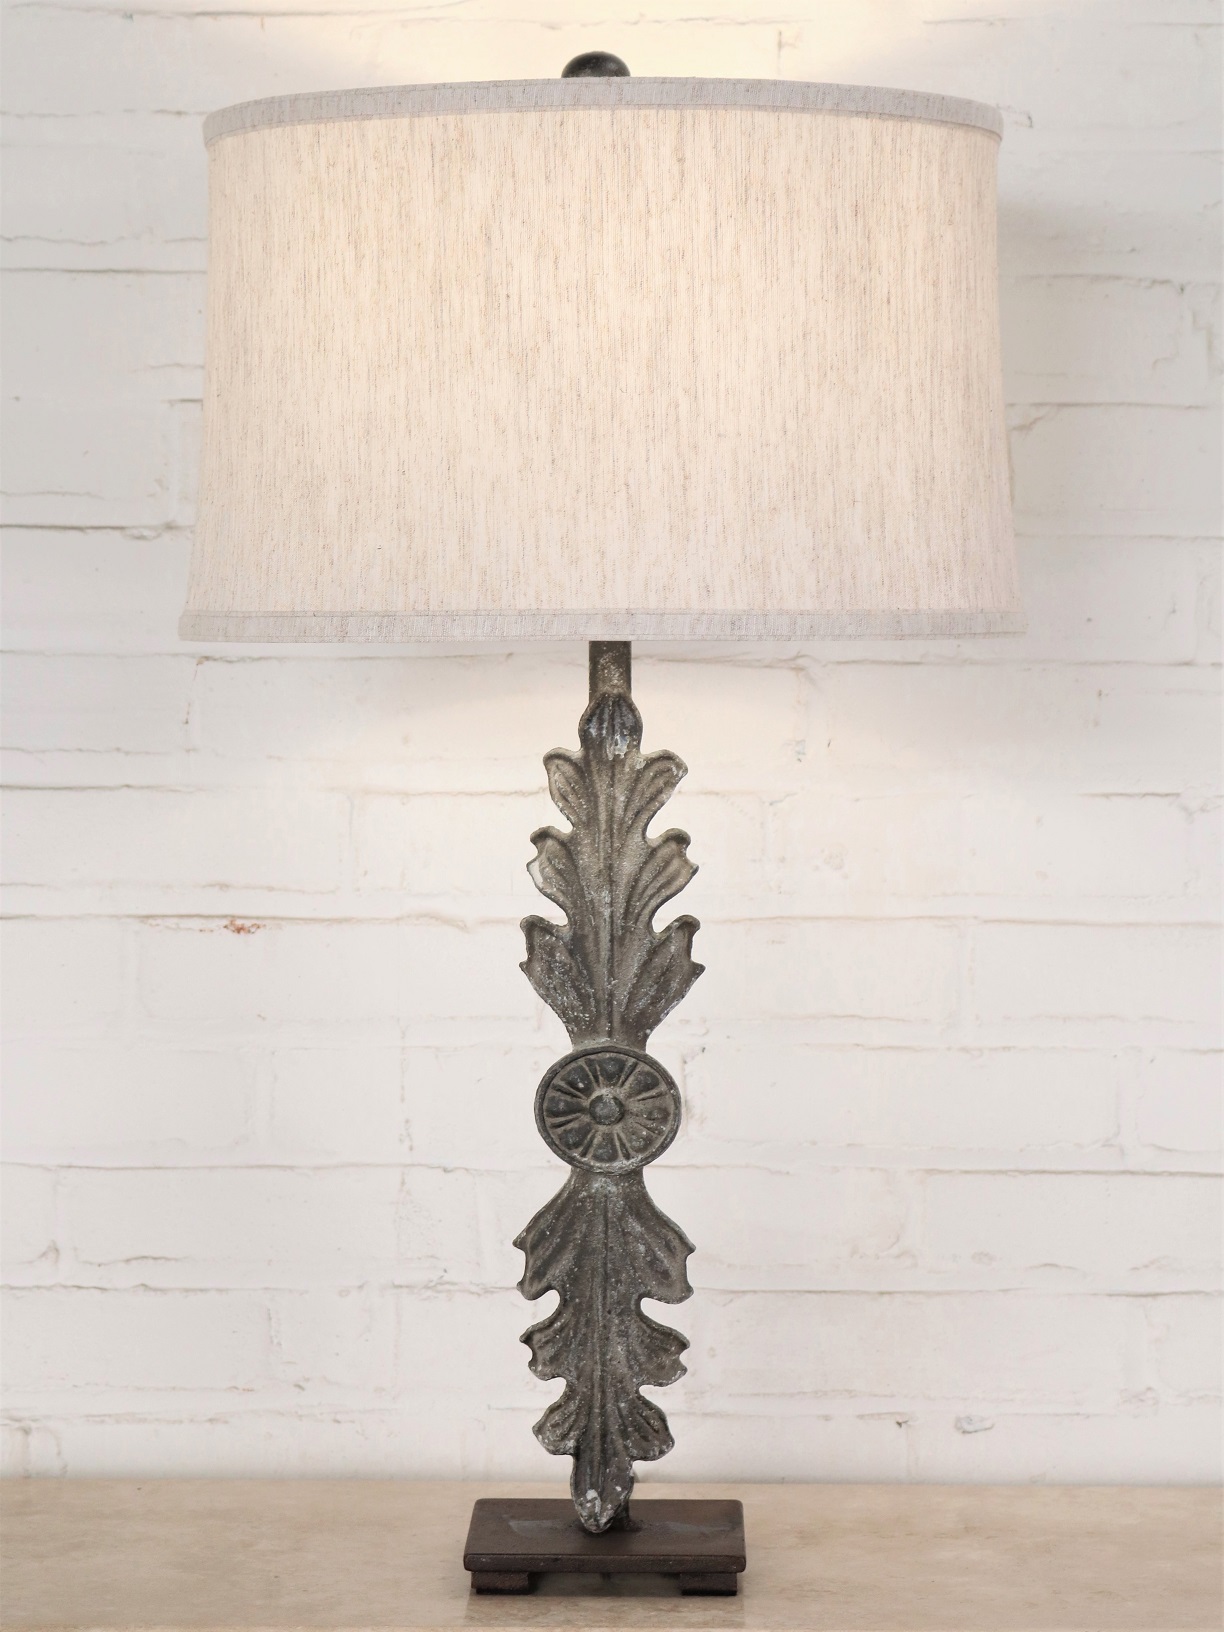 Leaf custom iron table lamp with a gray, distressed finish on a dark iron base